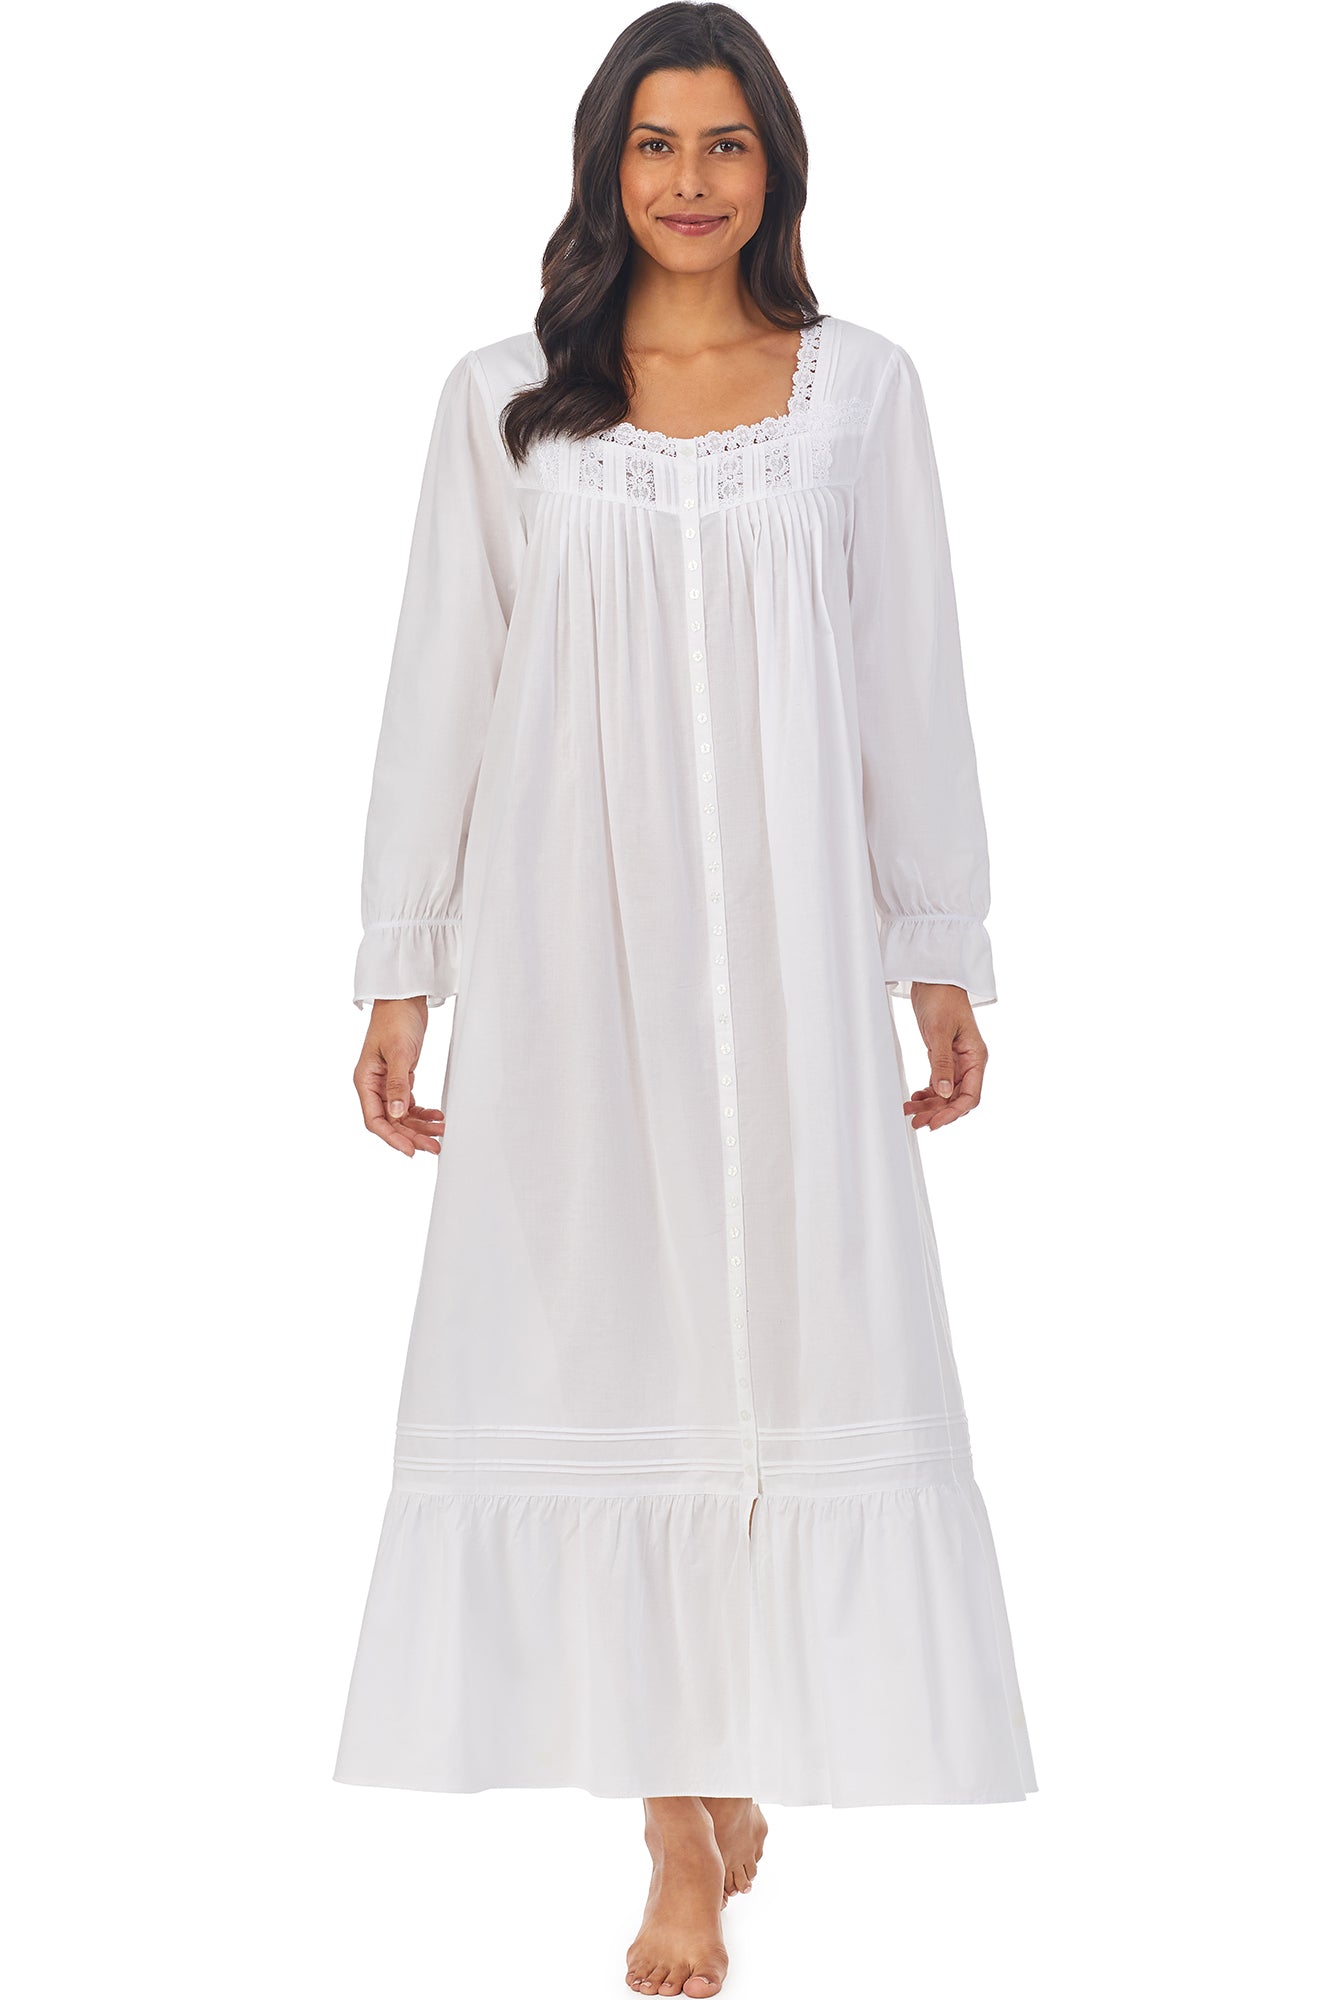 A lady wearing a white long sleeve button front robe..